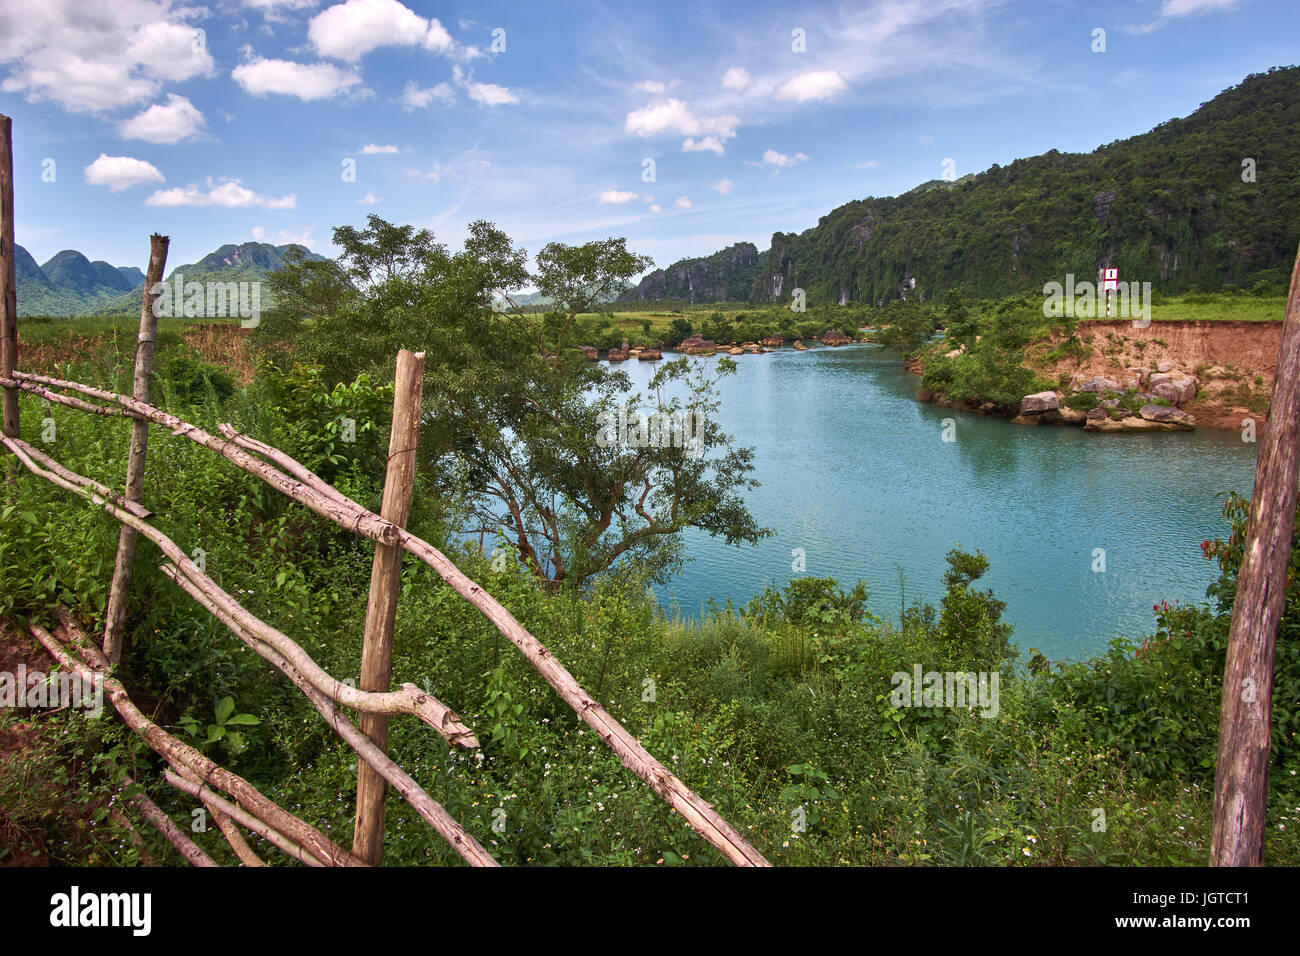 Wooden fence with a turquoise colored river near the town of Phong Nha in the National Park of Phong Nha Ke Bang, Vietnam. Stock Photo